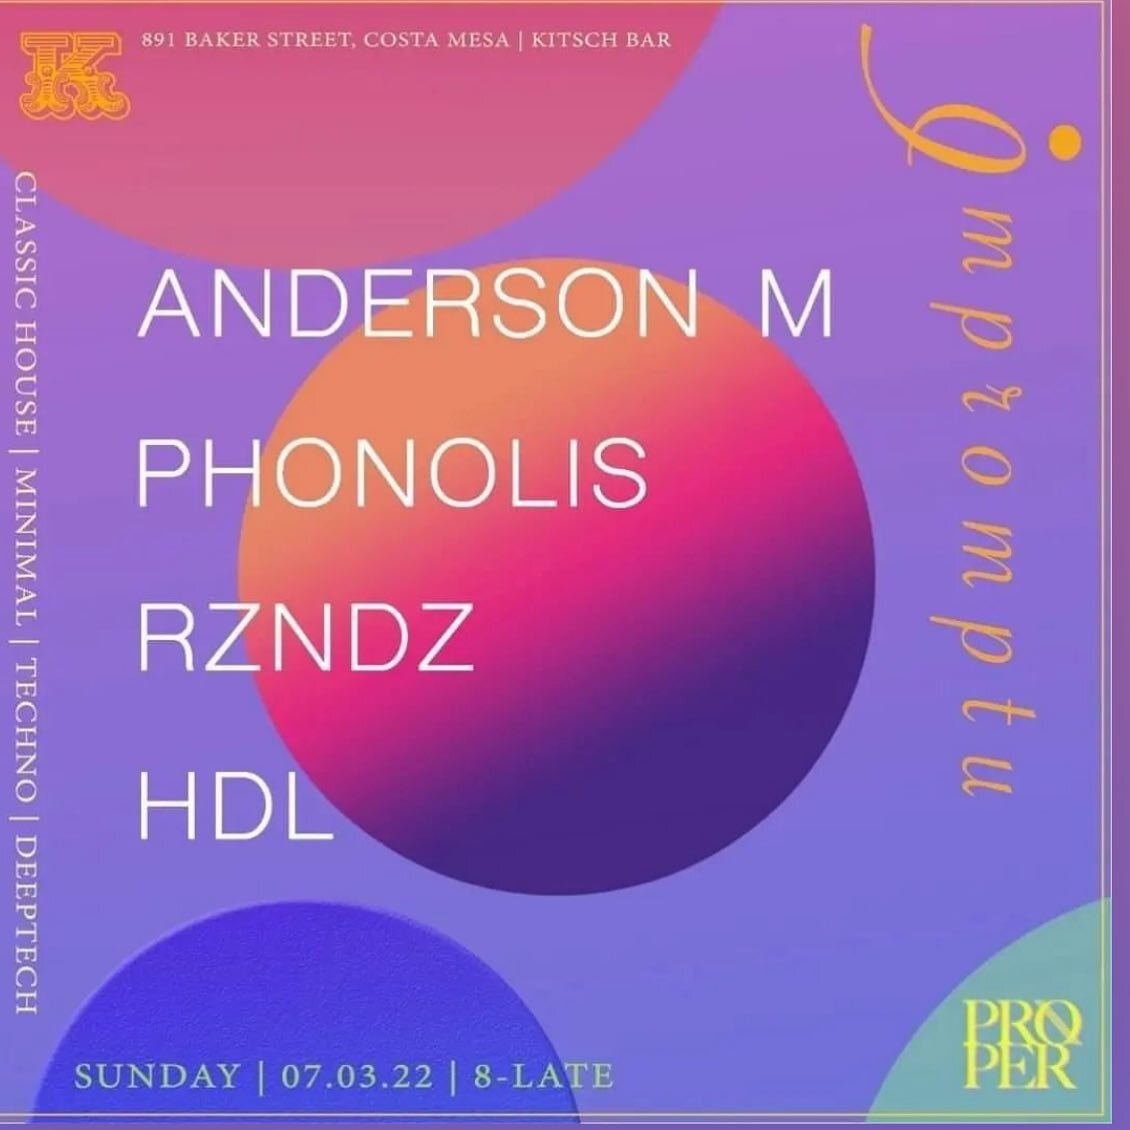 SUNDAY | 07.03 | RSVP ( LINK IN BIO )

@____impromptu____ @thekitschbar 

SPECIAL GUESTS

@ANDERSONMMUSIC
@PHONOLIS 
@RZNDZ 
@HDL_MUSIC 

Presented by @PROPER_HD

#HOUSE #TECHNO #MINIMAL #DEEPTECH #TECHHOUSE #ACID #DEEPHOUSE #IMPROMPTU #PROPERHD #KIT